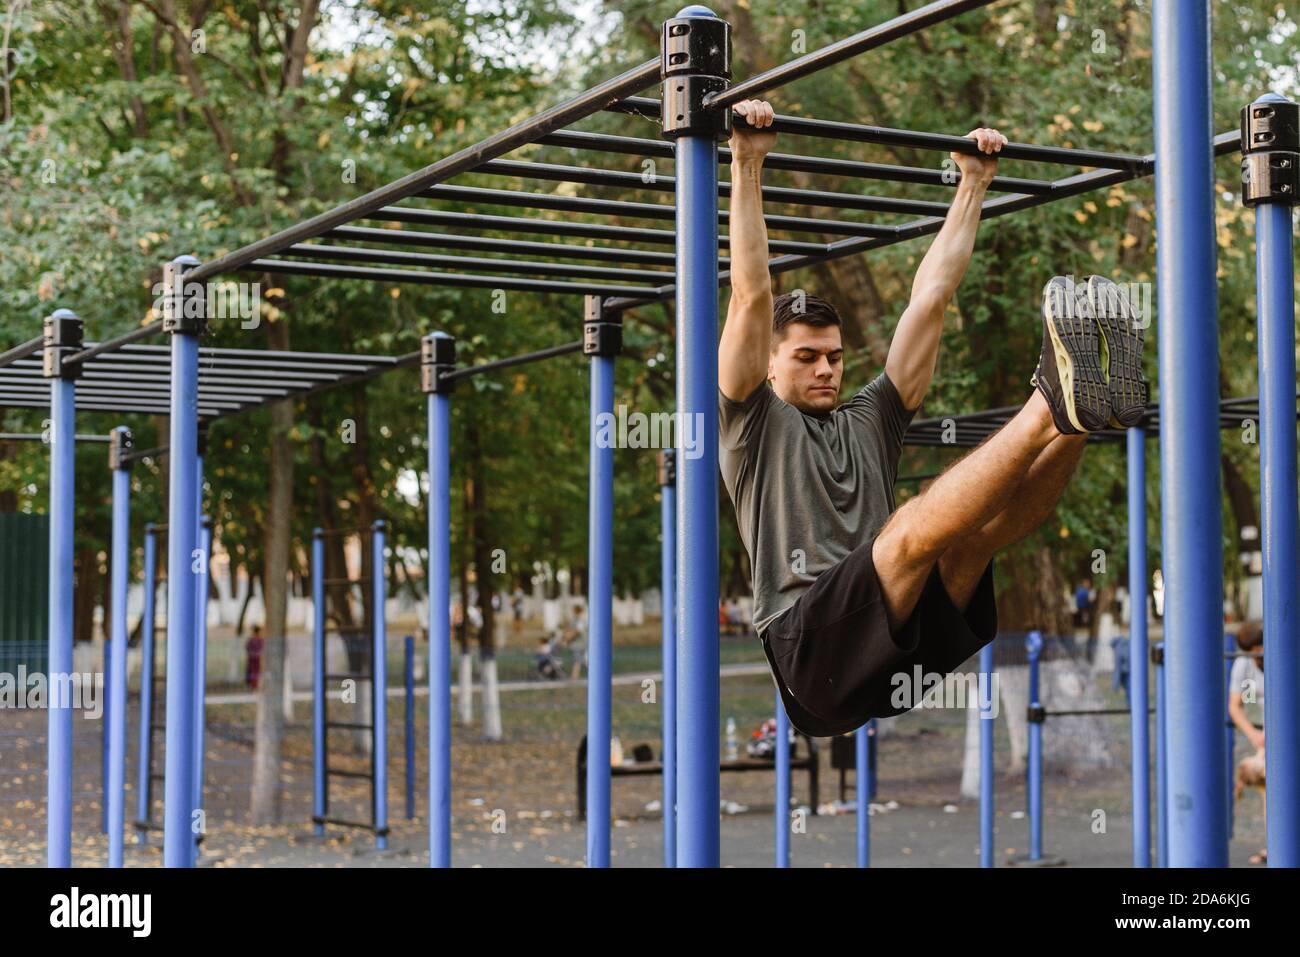 Pull up bars in a park stock photo. Image of stay, trail - 184906608